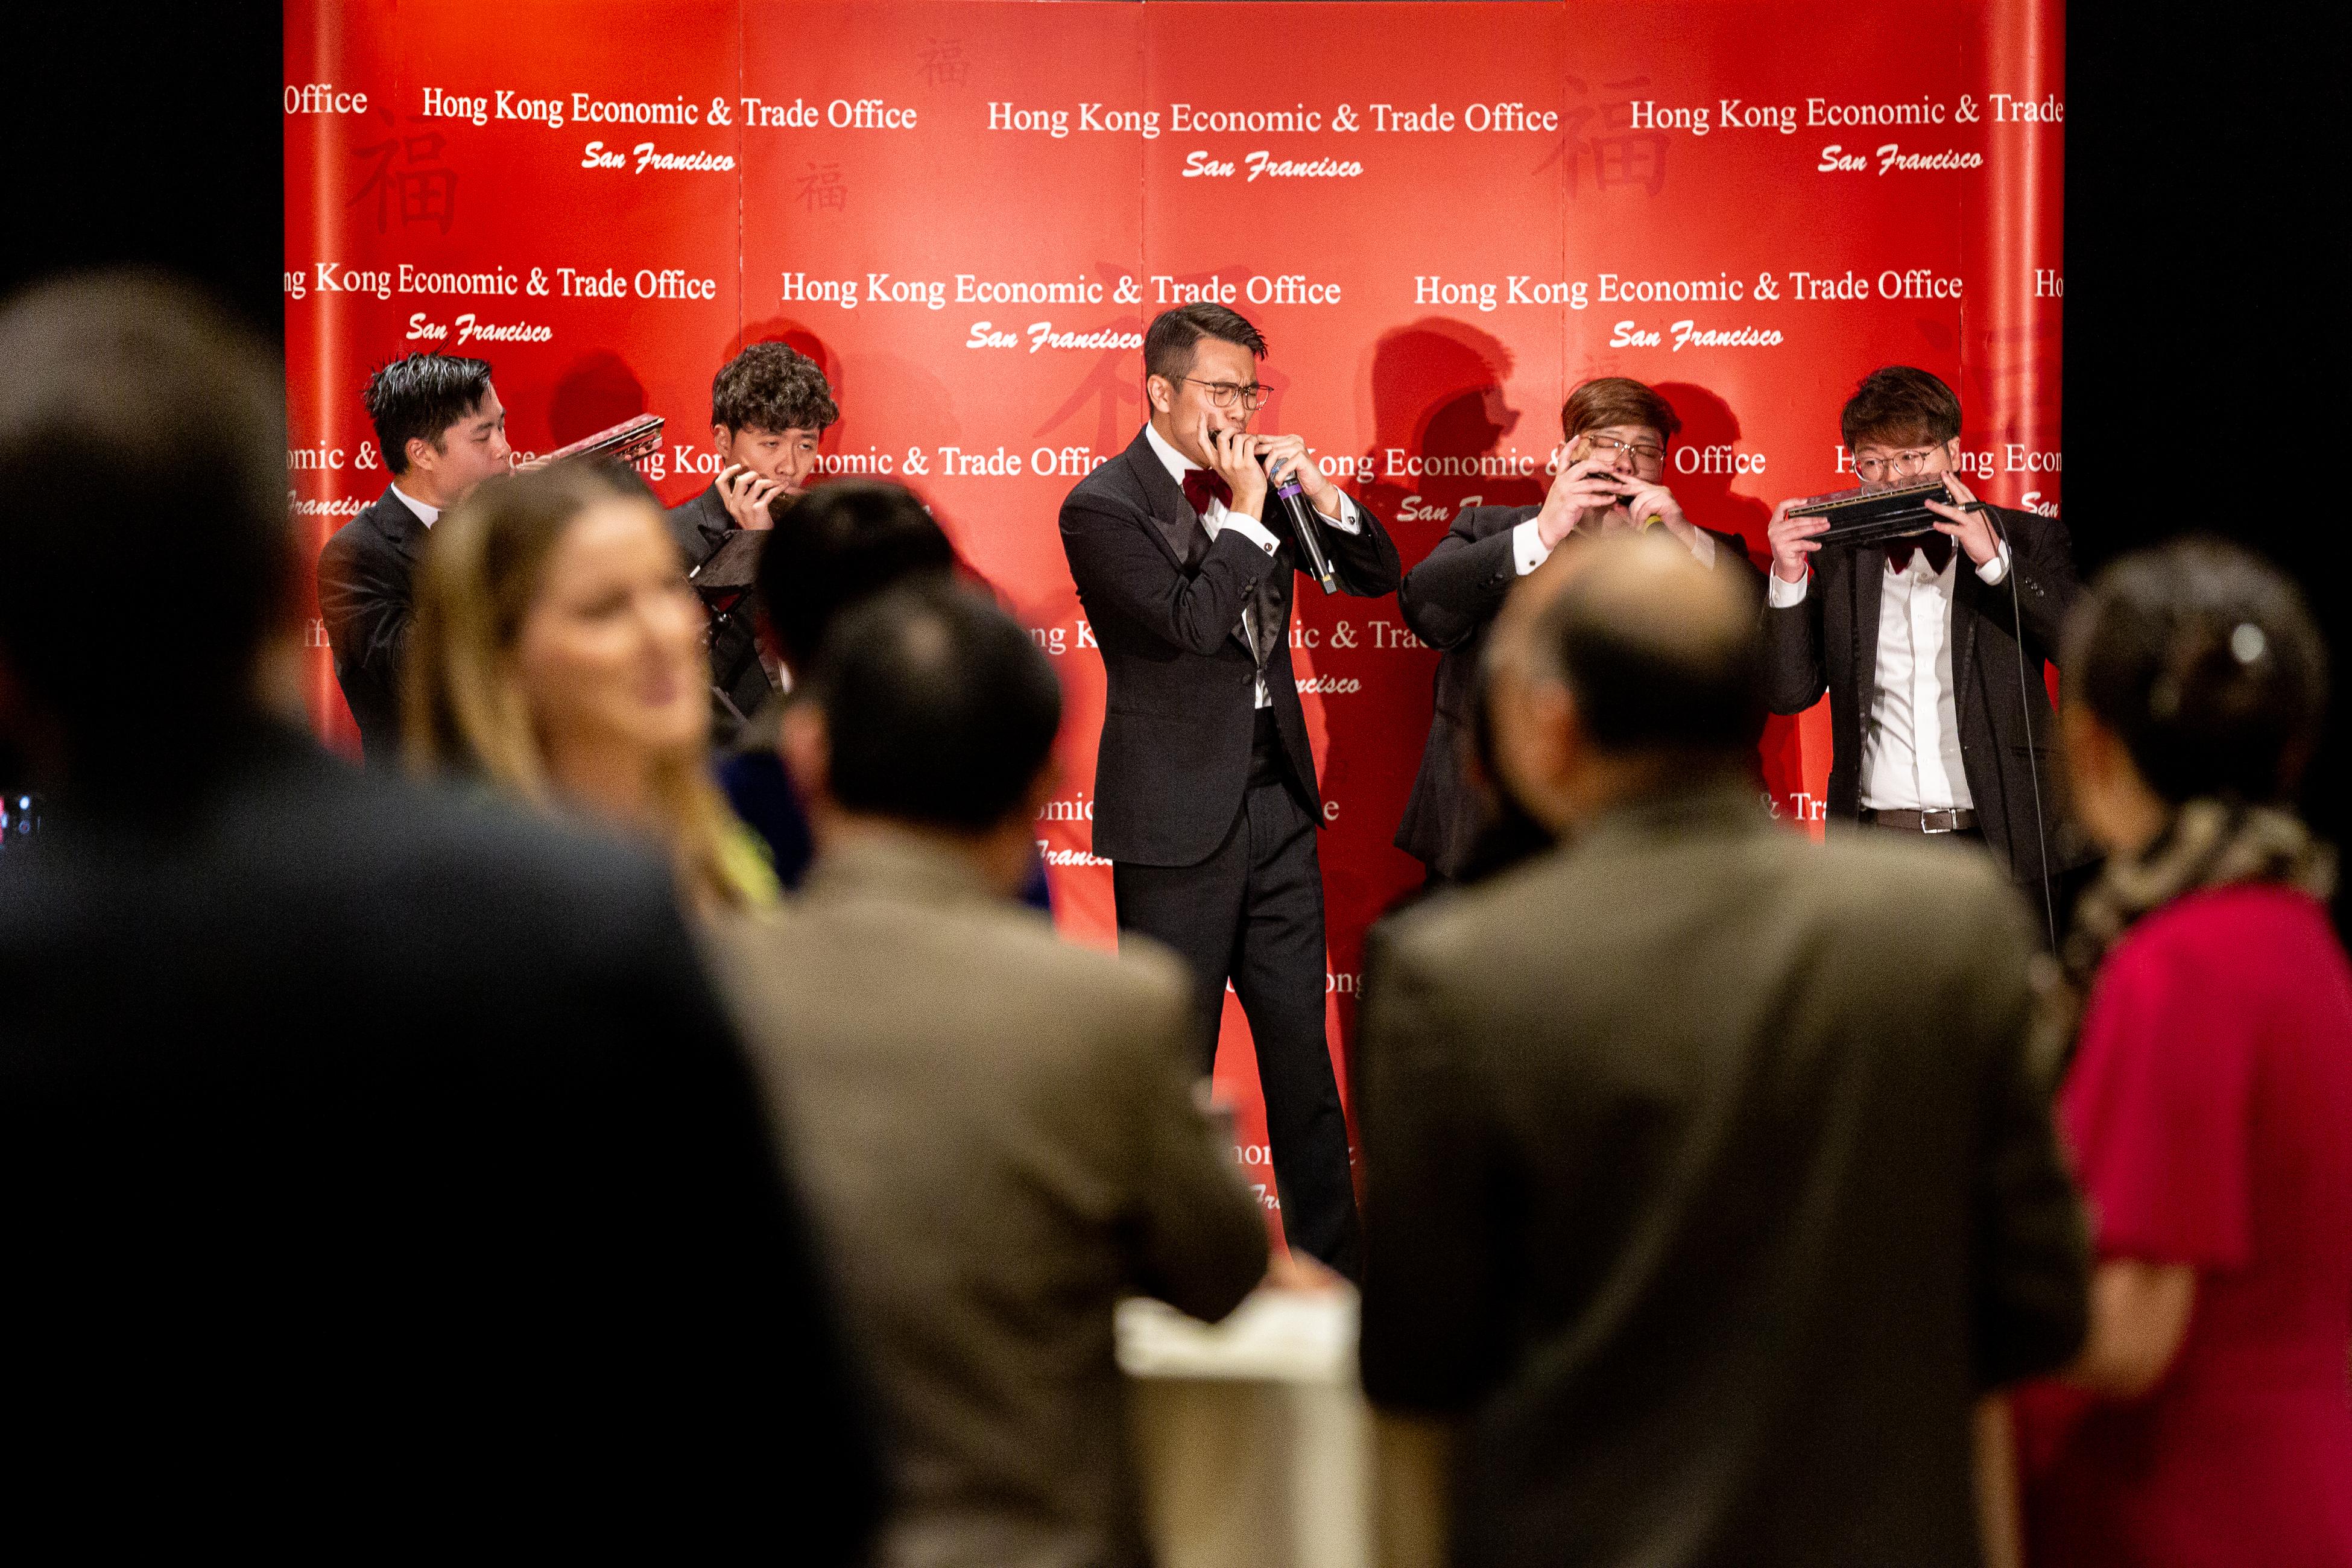 The Hong Kong Economic and Trade Office in San Francisco hosted a spring reception celebrating the Year of the Dragon in Seattle, Washington, on March 5 (Seattle time). Photo shows RedBricks Harmonica, a renowned harmonica ensemble from Hong Kong, performing at the reception.